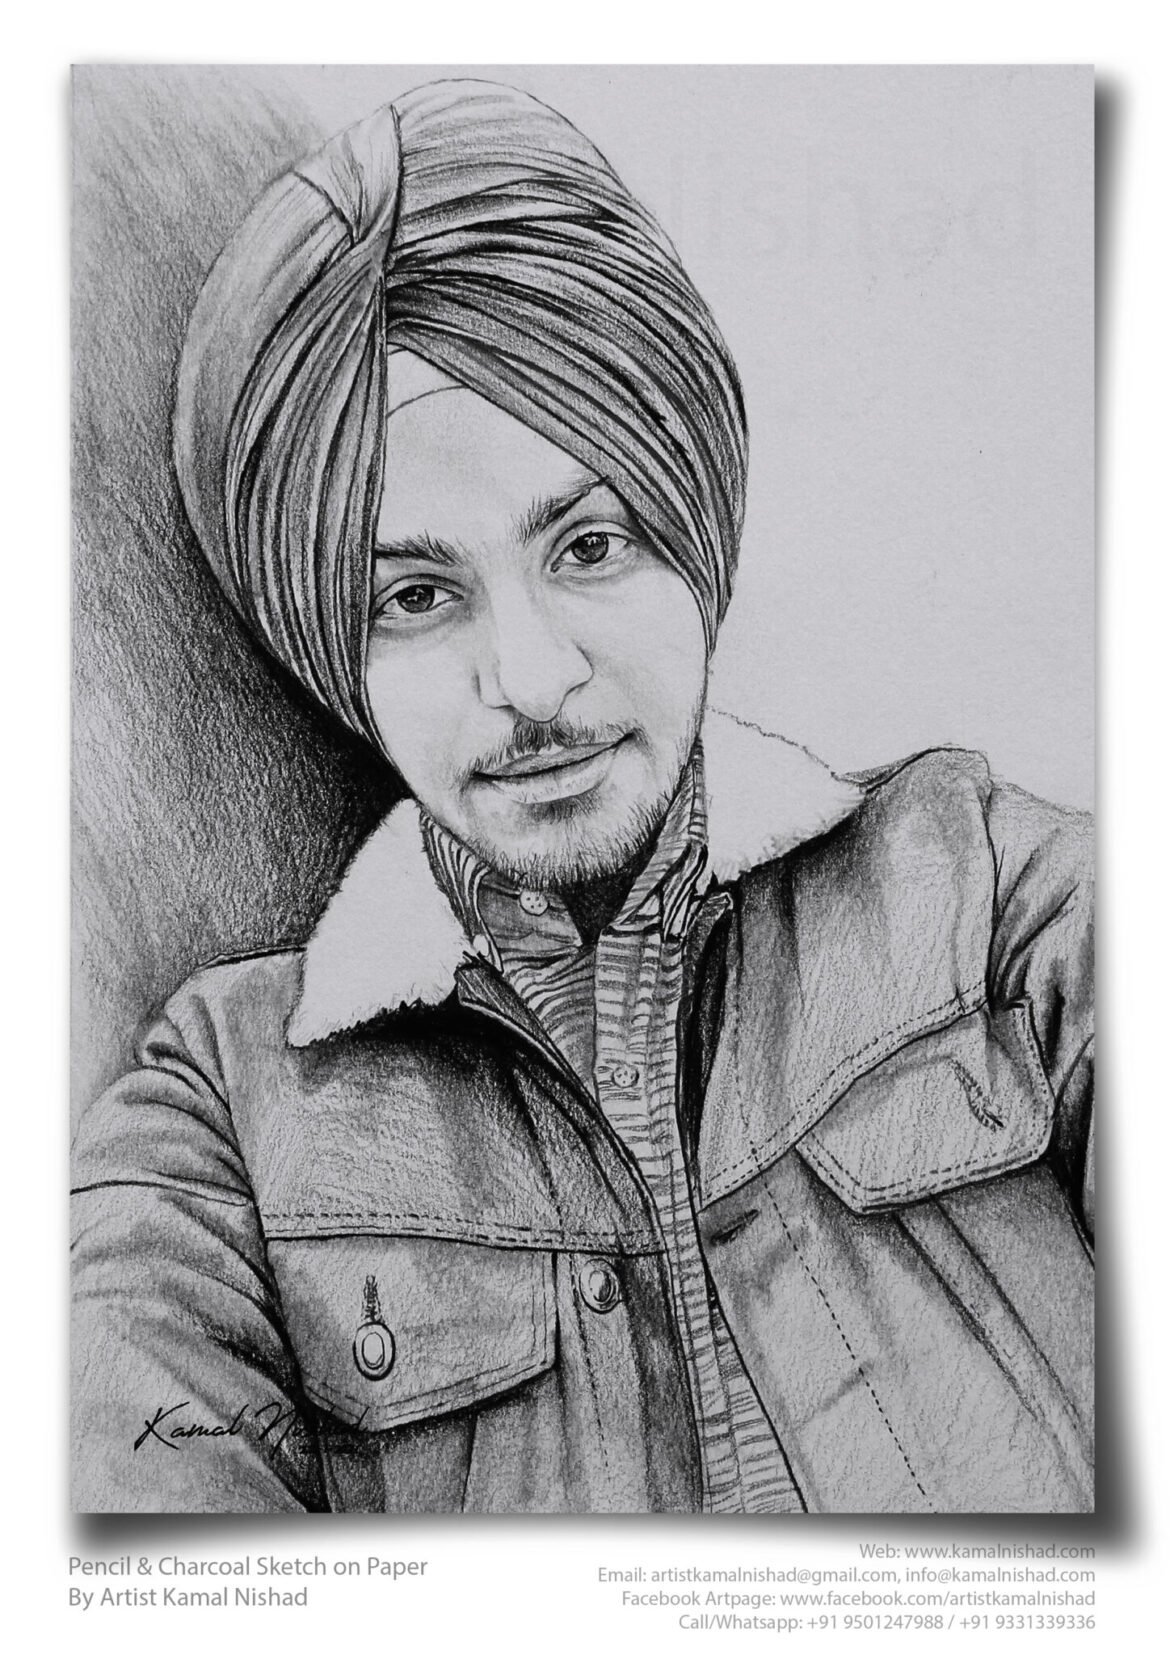 GOOD-LOOKING | Pencil & Charcoal Sketch Title : GOOD-LOOKING Medium : Pencil & Charcoal Sketch Size : A3 Paper size (Sketch size 21.0 x 23.7 cm*) Artist : Kamal Nishad This is a Handmade/hand-drawn Sketch made with Pencil & Charcoal “GOOD-LOOKING”. This is a Gift from One of my Client to his friend/close-one. 💐 SIZE: Paper size A3 (work area 08.3 x 11.7 inches *estimated) Created by © Kamal Nishad. All rights reserved.